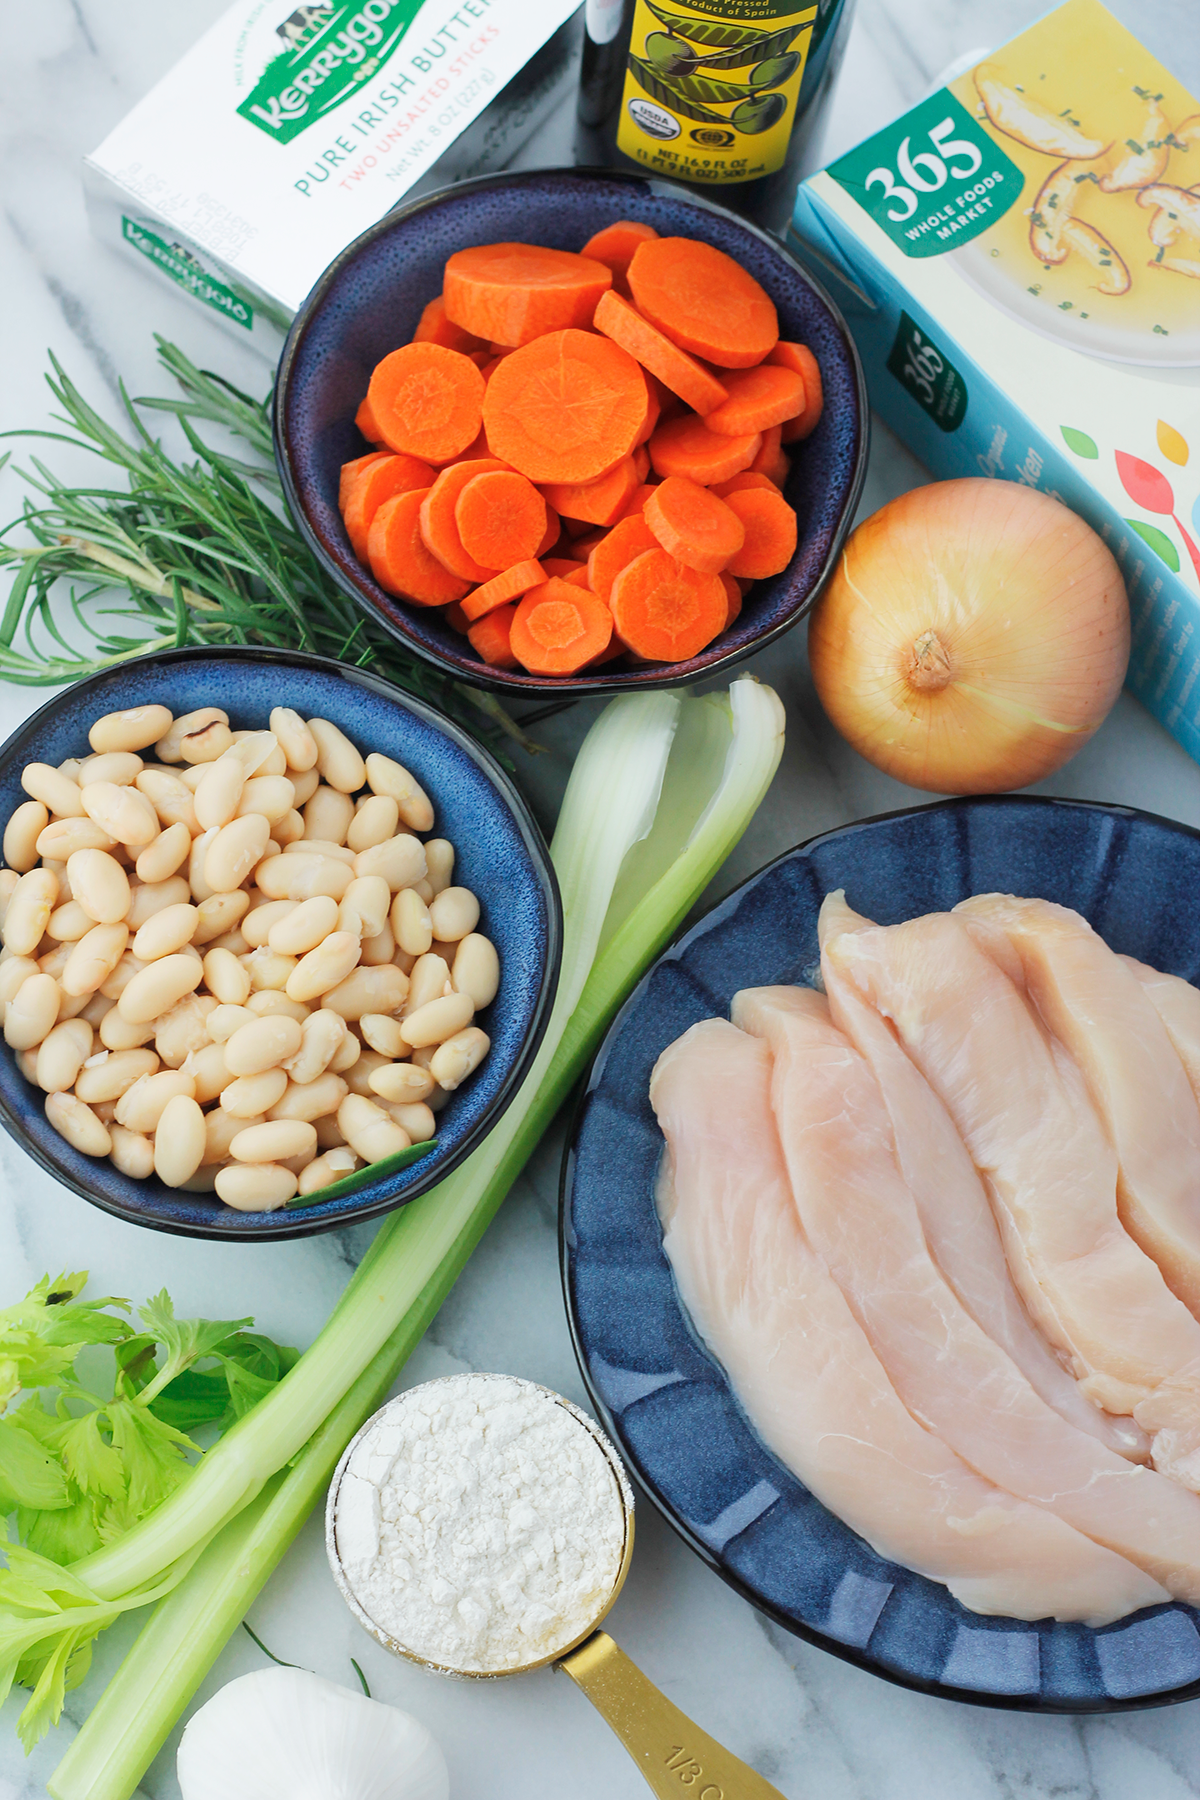 Overhead shot of ingredients for making creamy rosemary chicken soup. Clockwise butter, bottle of olive oil, box of chicken stock, unpeeled onion, to the left of the onion bowl of sliced carrots, to the right of onion plate of sliced raw chicken breast, measuring cup filled with flour, garlic, celery stalks, bowl of northern beans, and stems of rosemary.